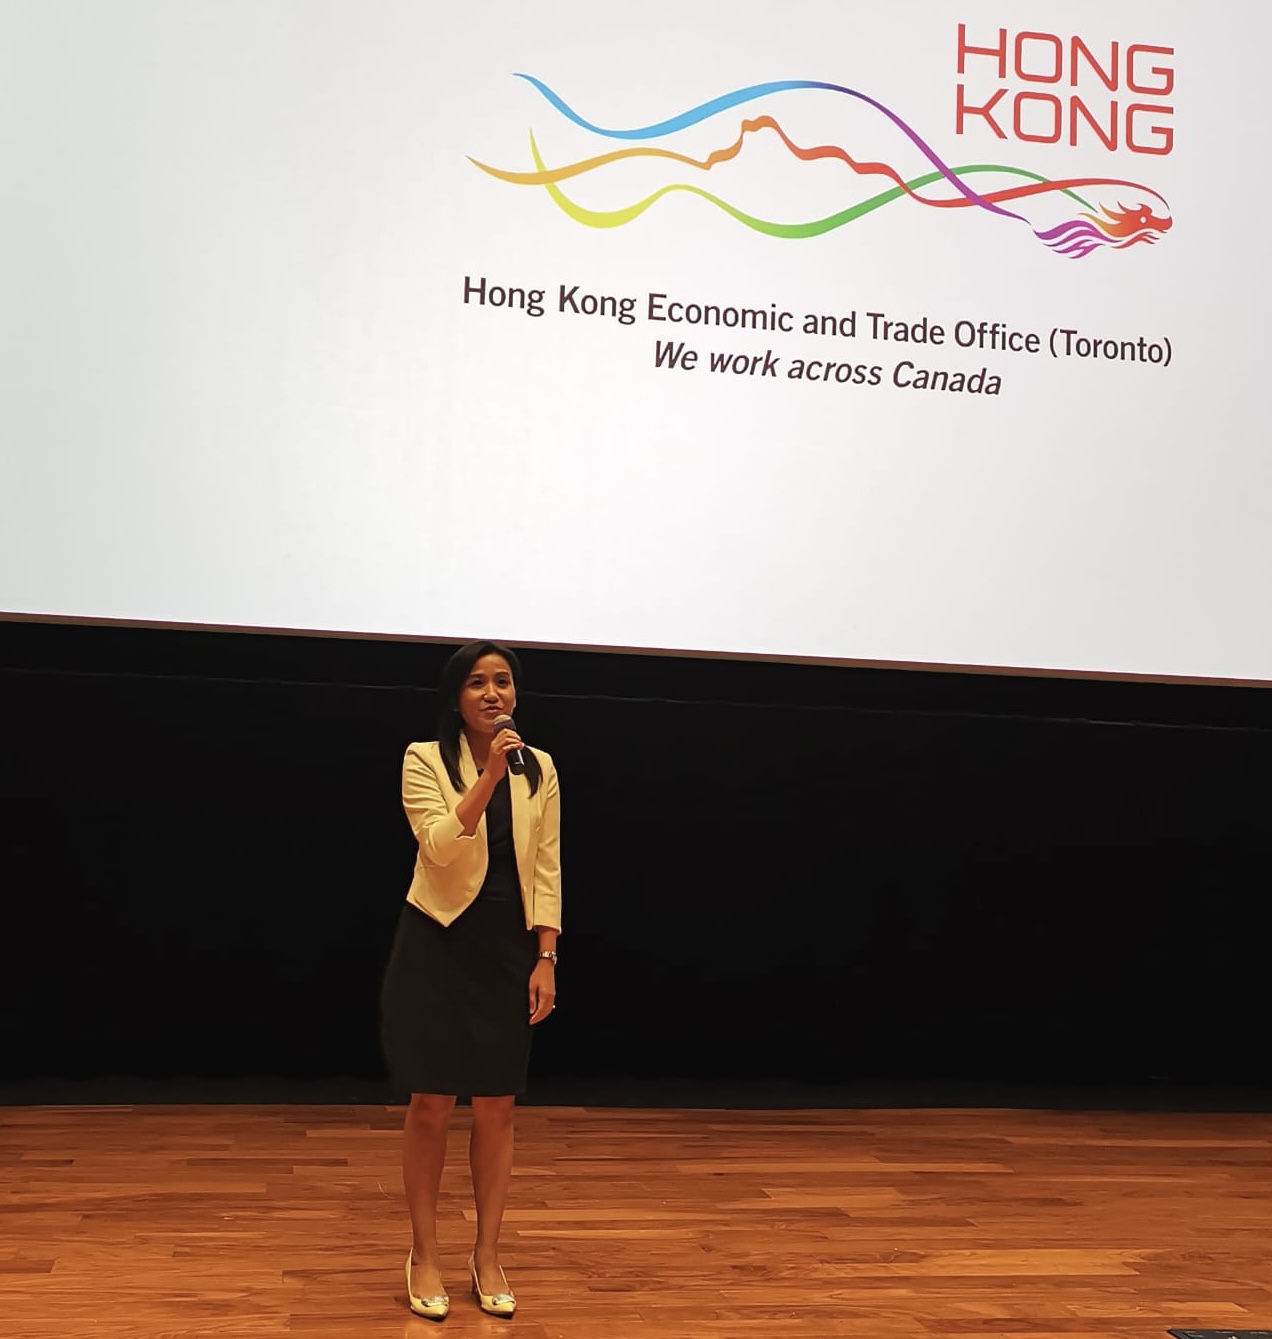 Director of the Hong Kong Economic and Trade Office (Toronto) (HKETO), Ms Emily Mo, speaks before the screening of Hong Kong film “Keep Rolling” at the Innis Town Hall on August 12.